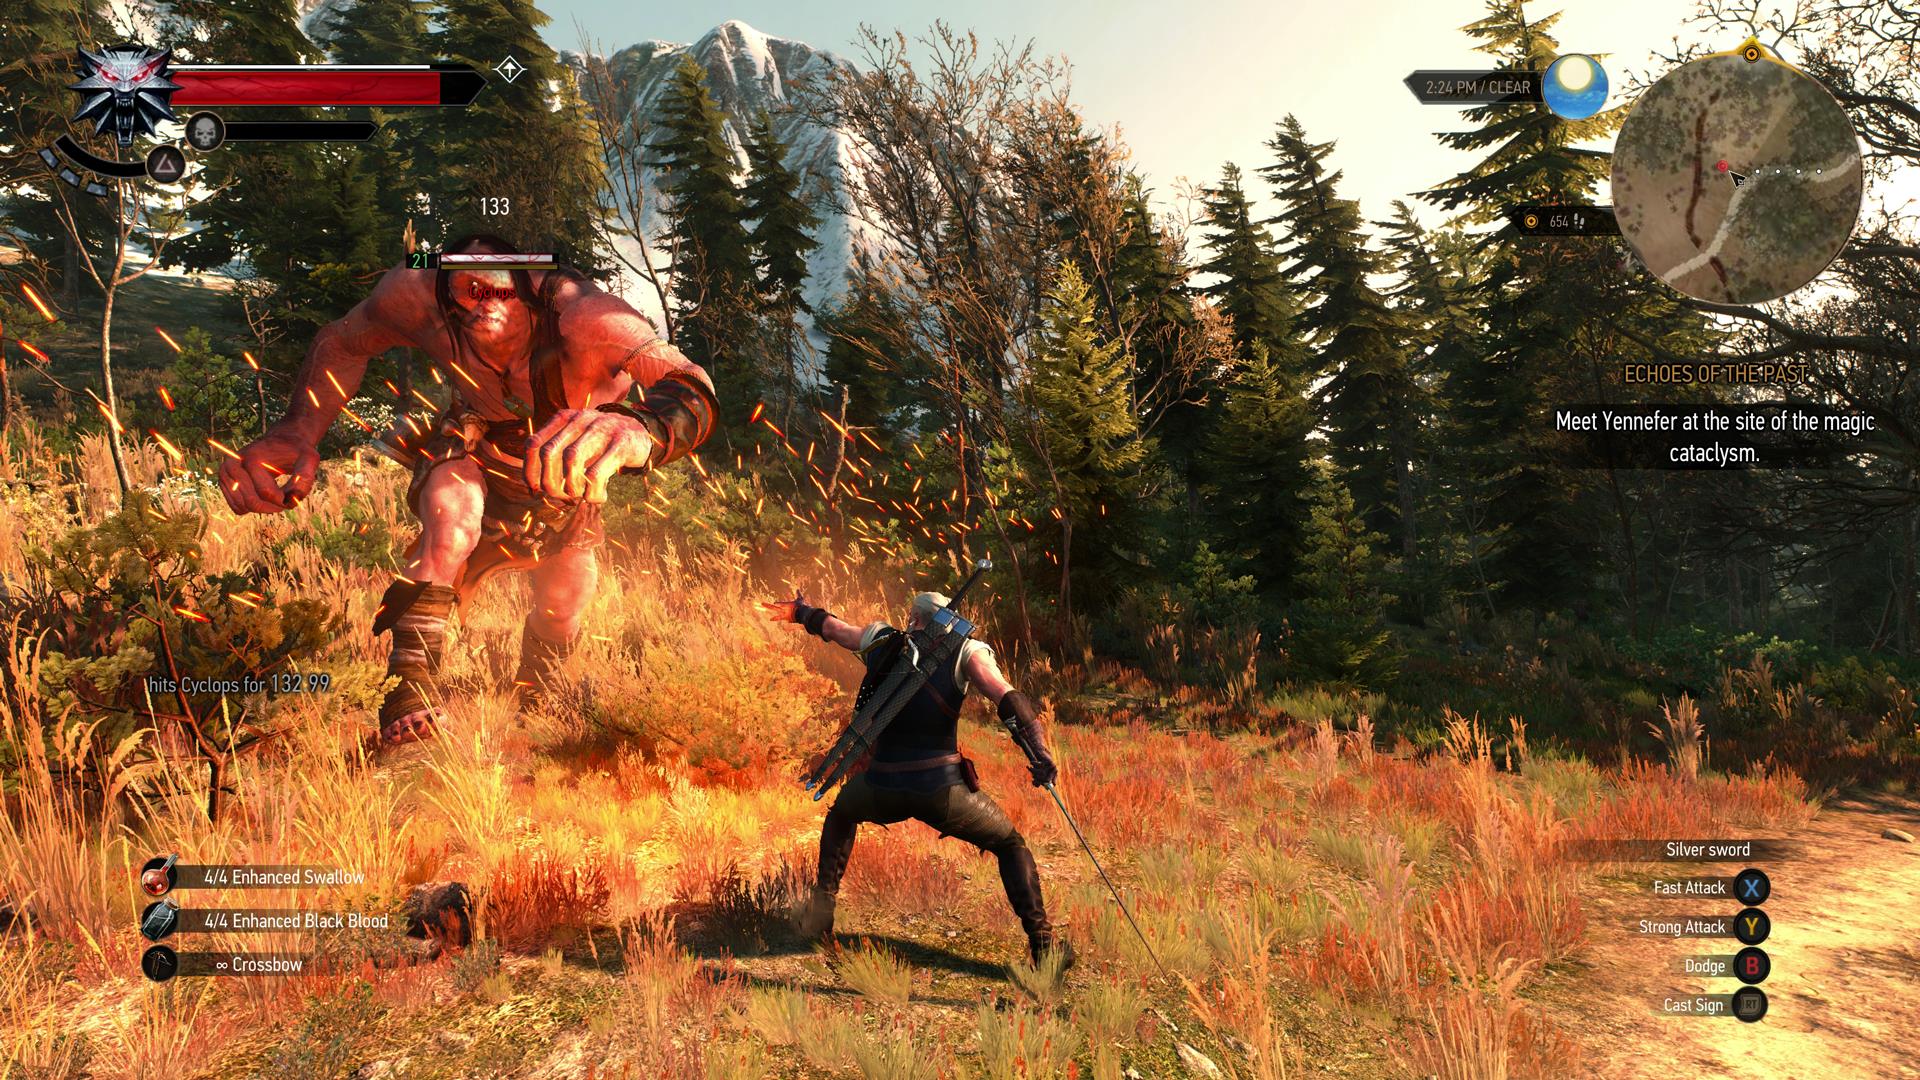 The-Witcher-3-Wild-Hunt-Gets-Fresh-Screenshots-Showing-Interface-Combat-More-480081-8.jpg